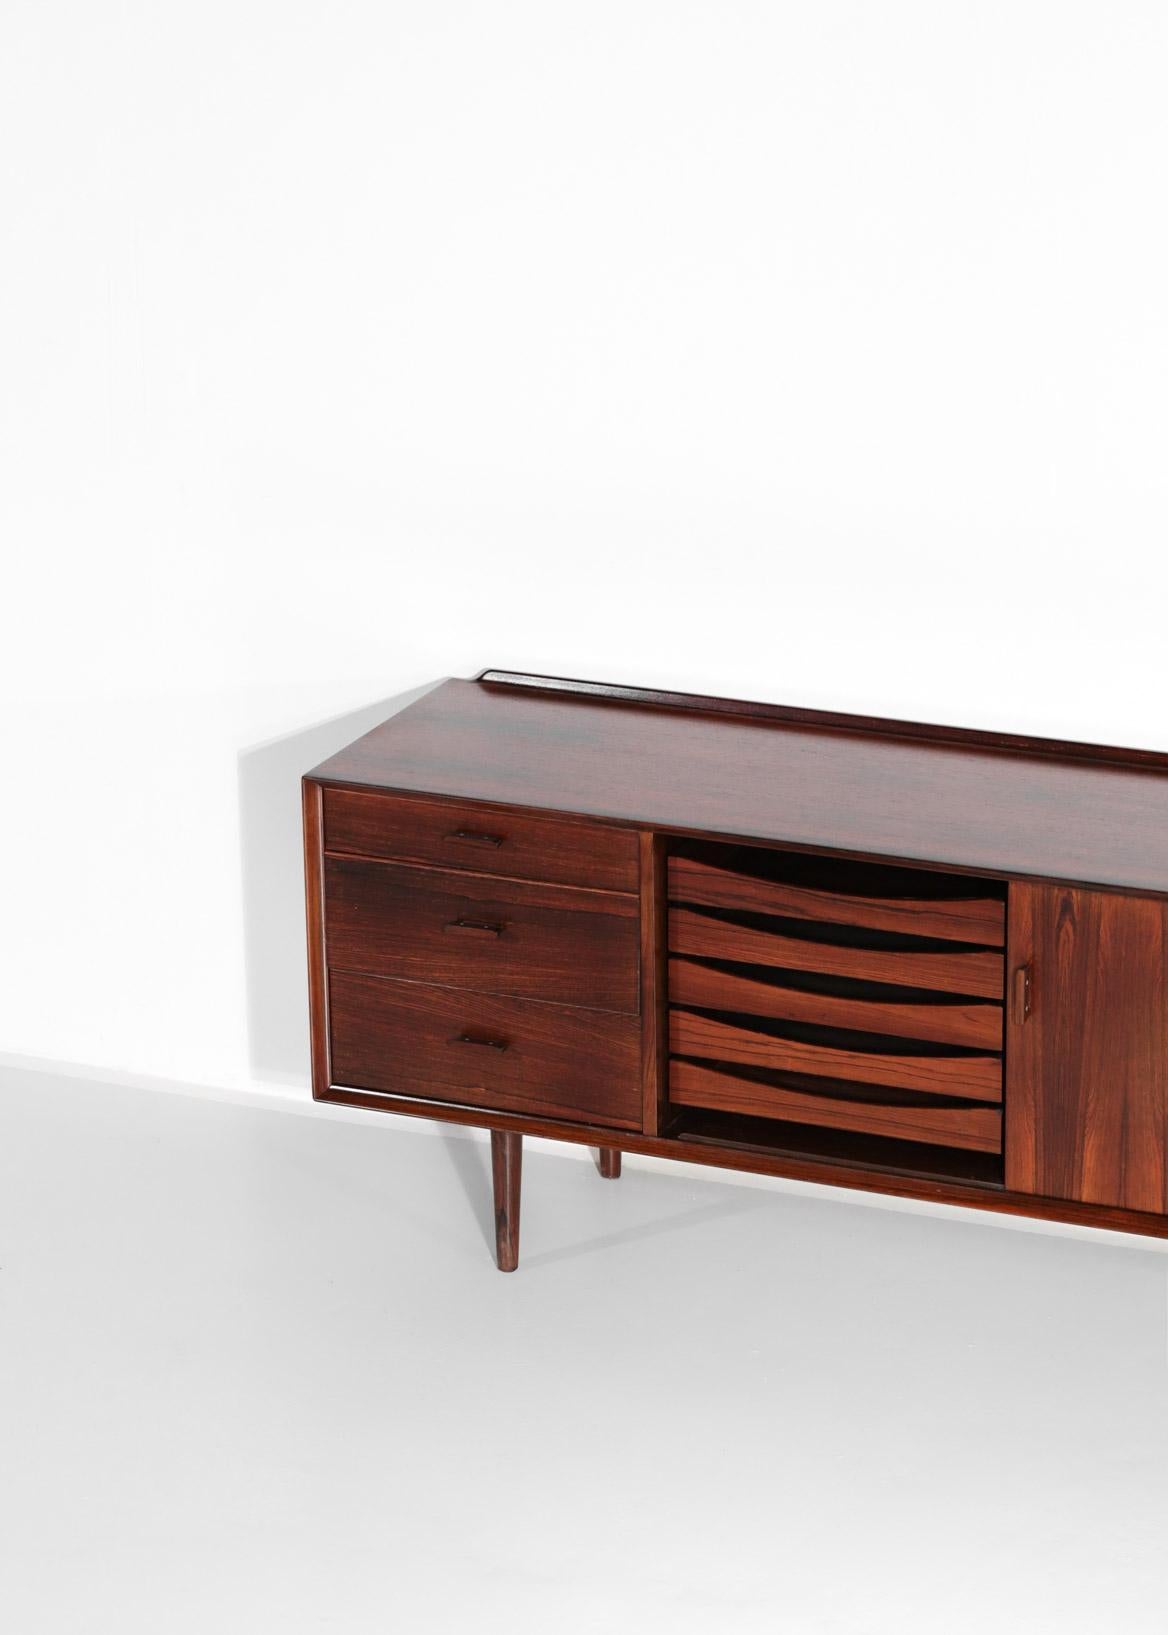 Small Sideboard by Arne Vodder for Sibast, Danish Design In Good Condition For Sale In Lyon, FR